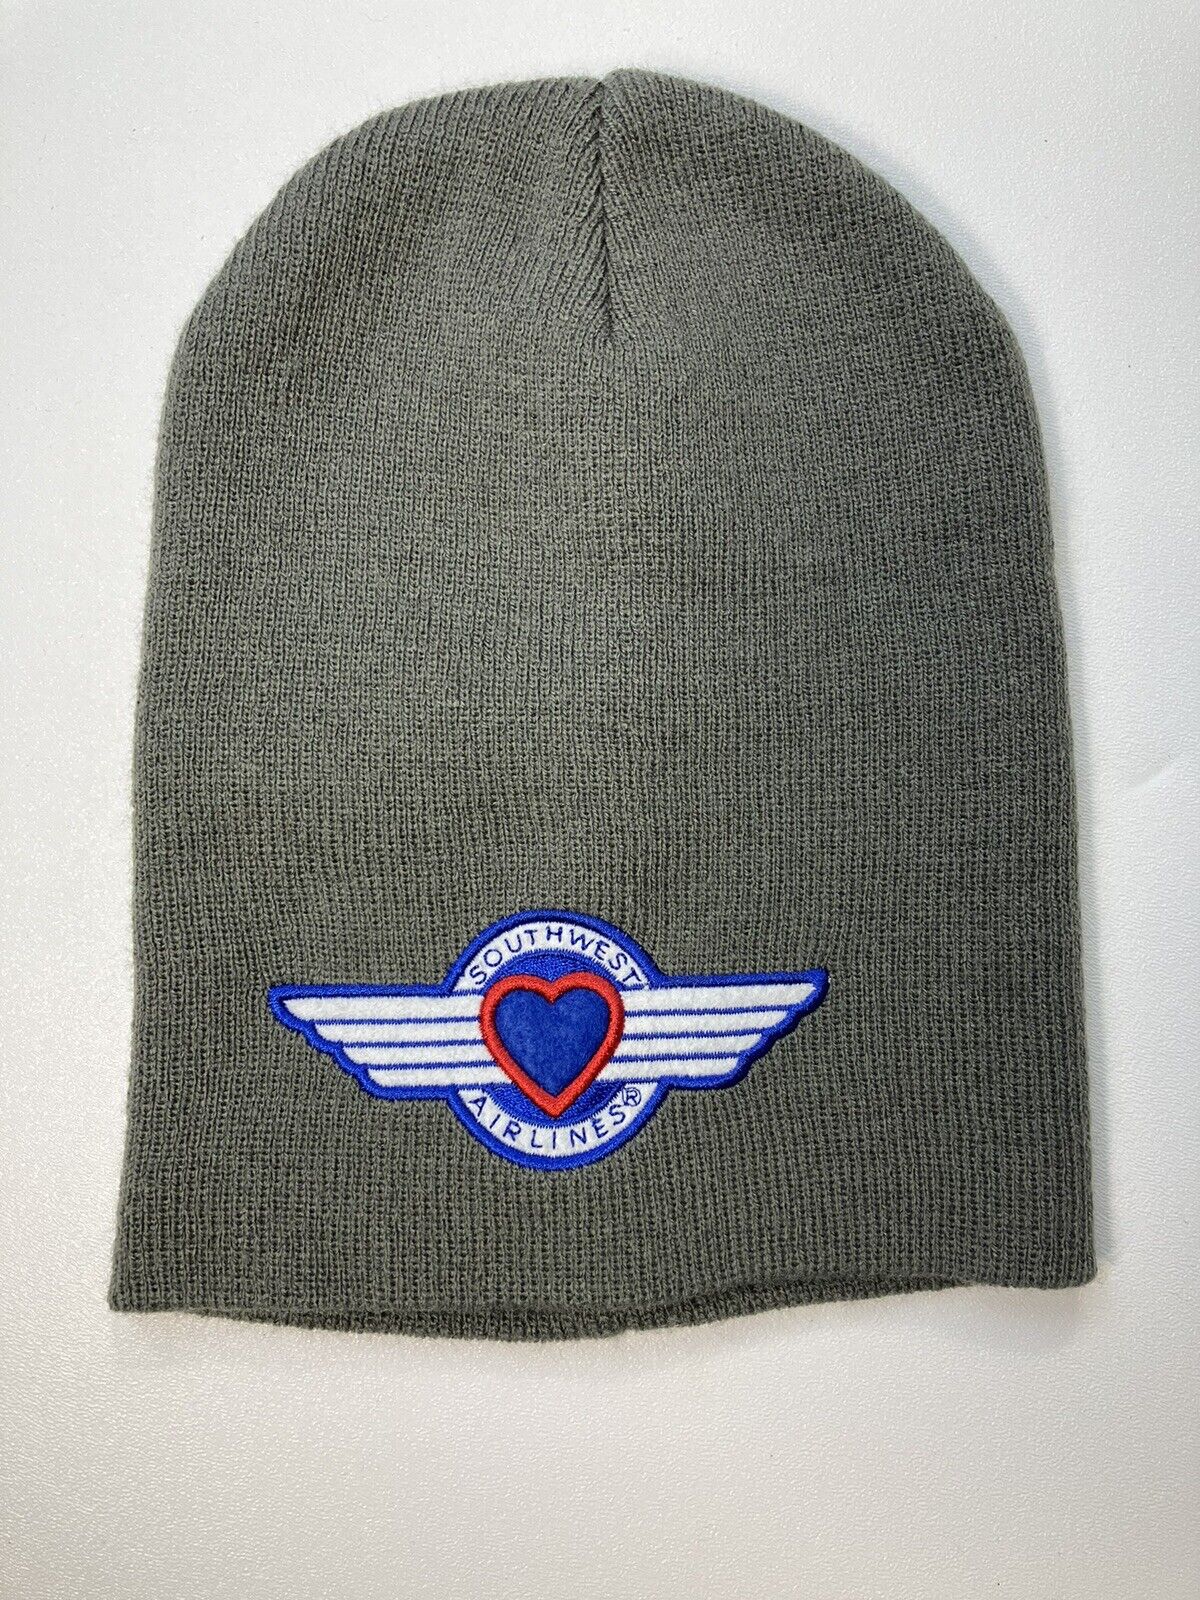 Southwest Airlines Beanie Hat